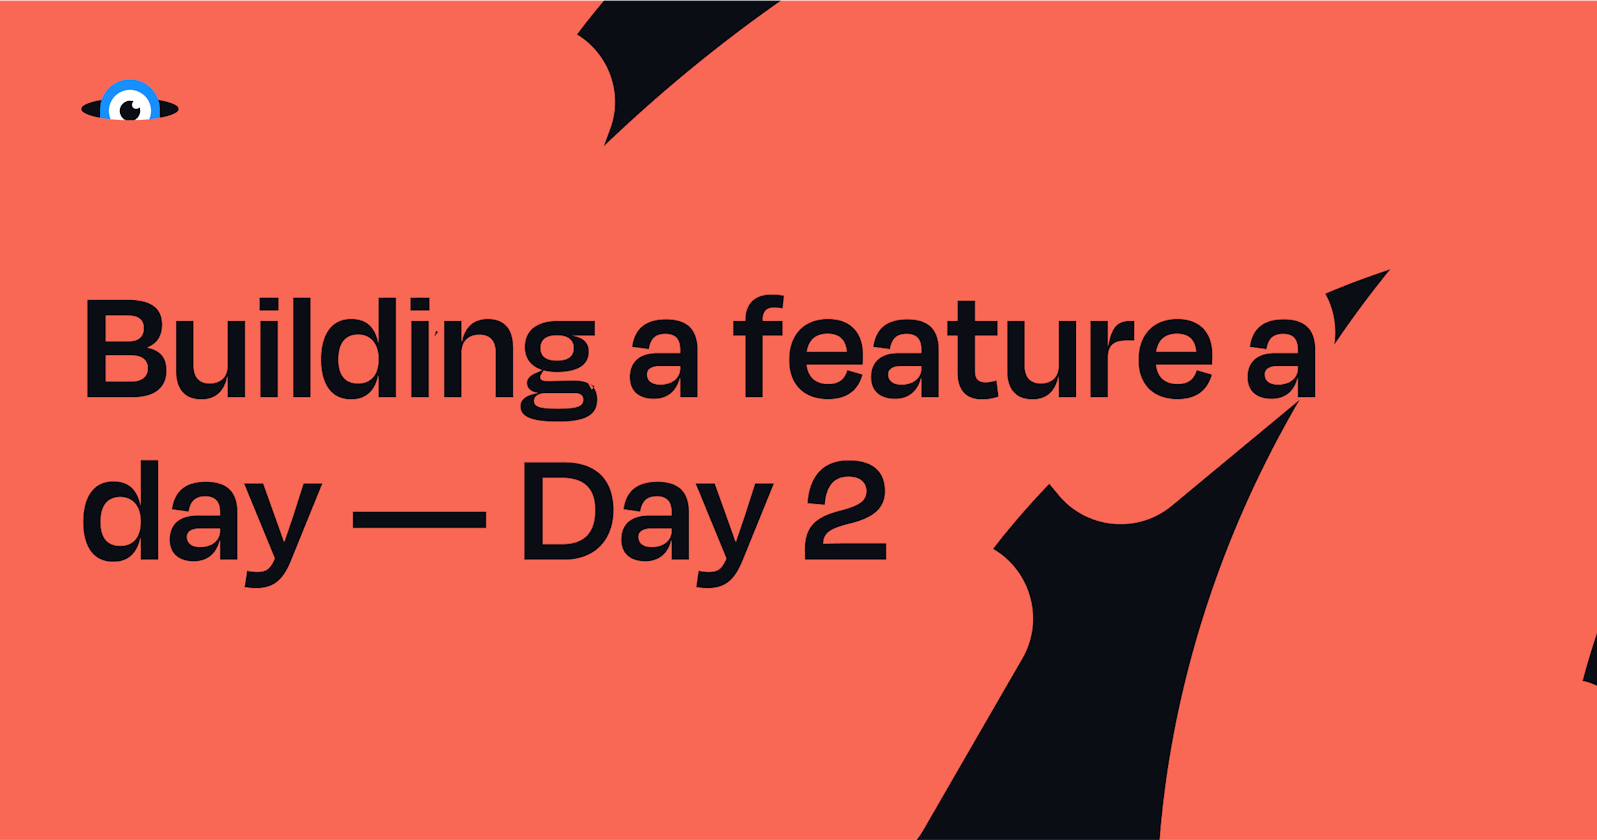 Building a feature a day - Day 2